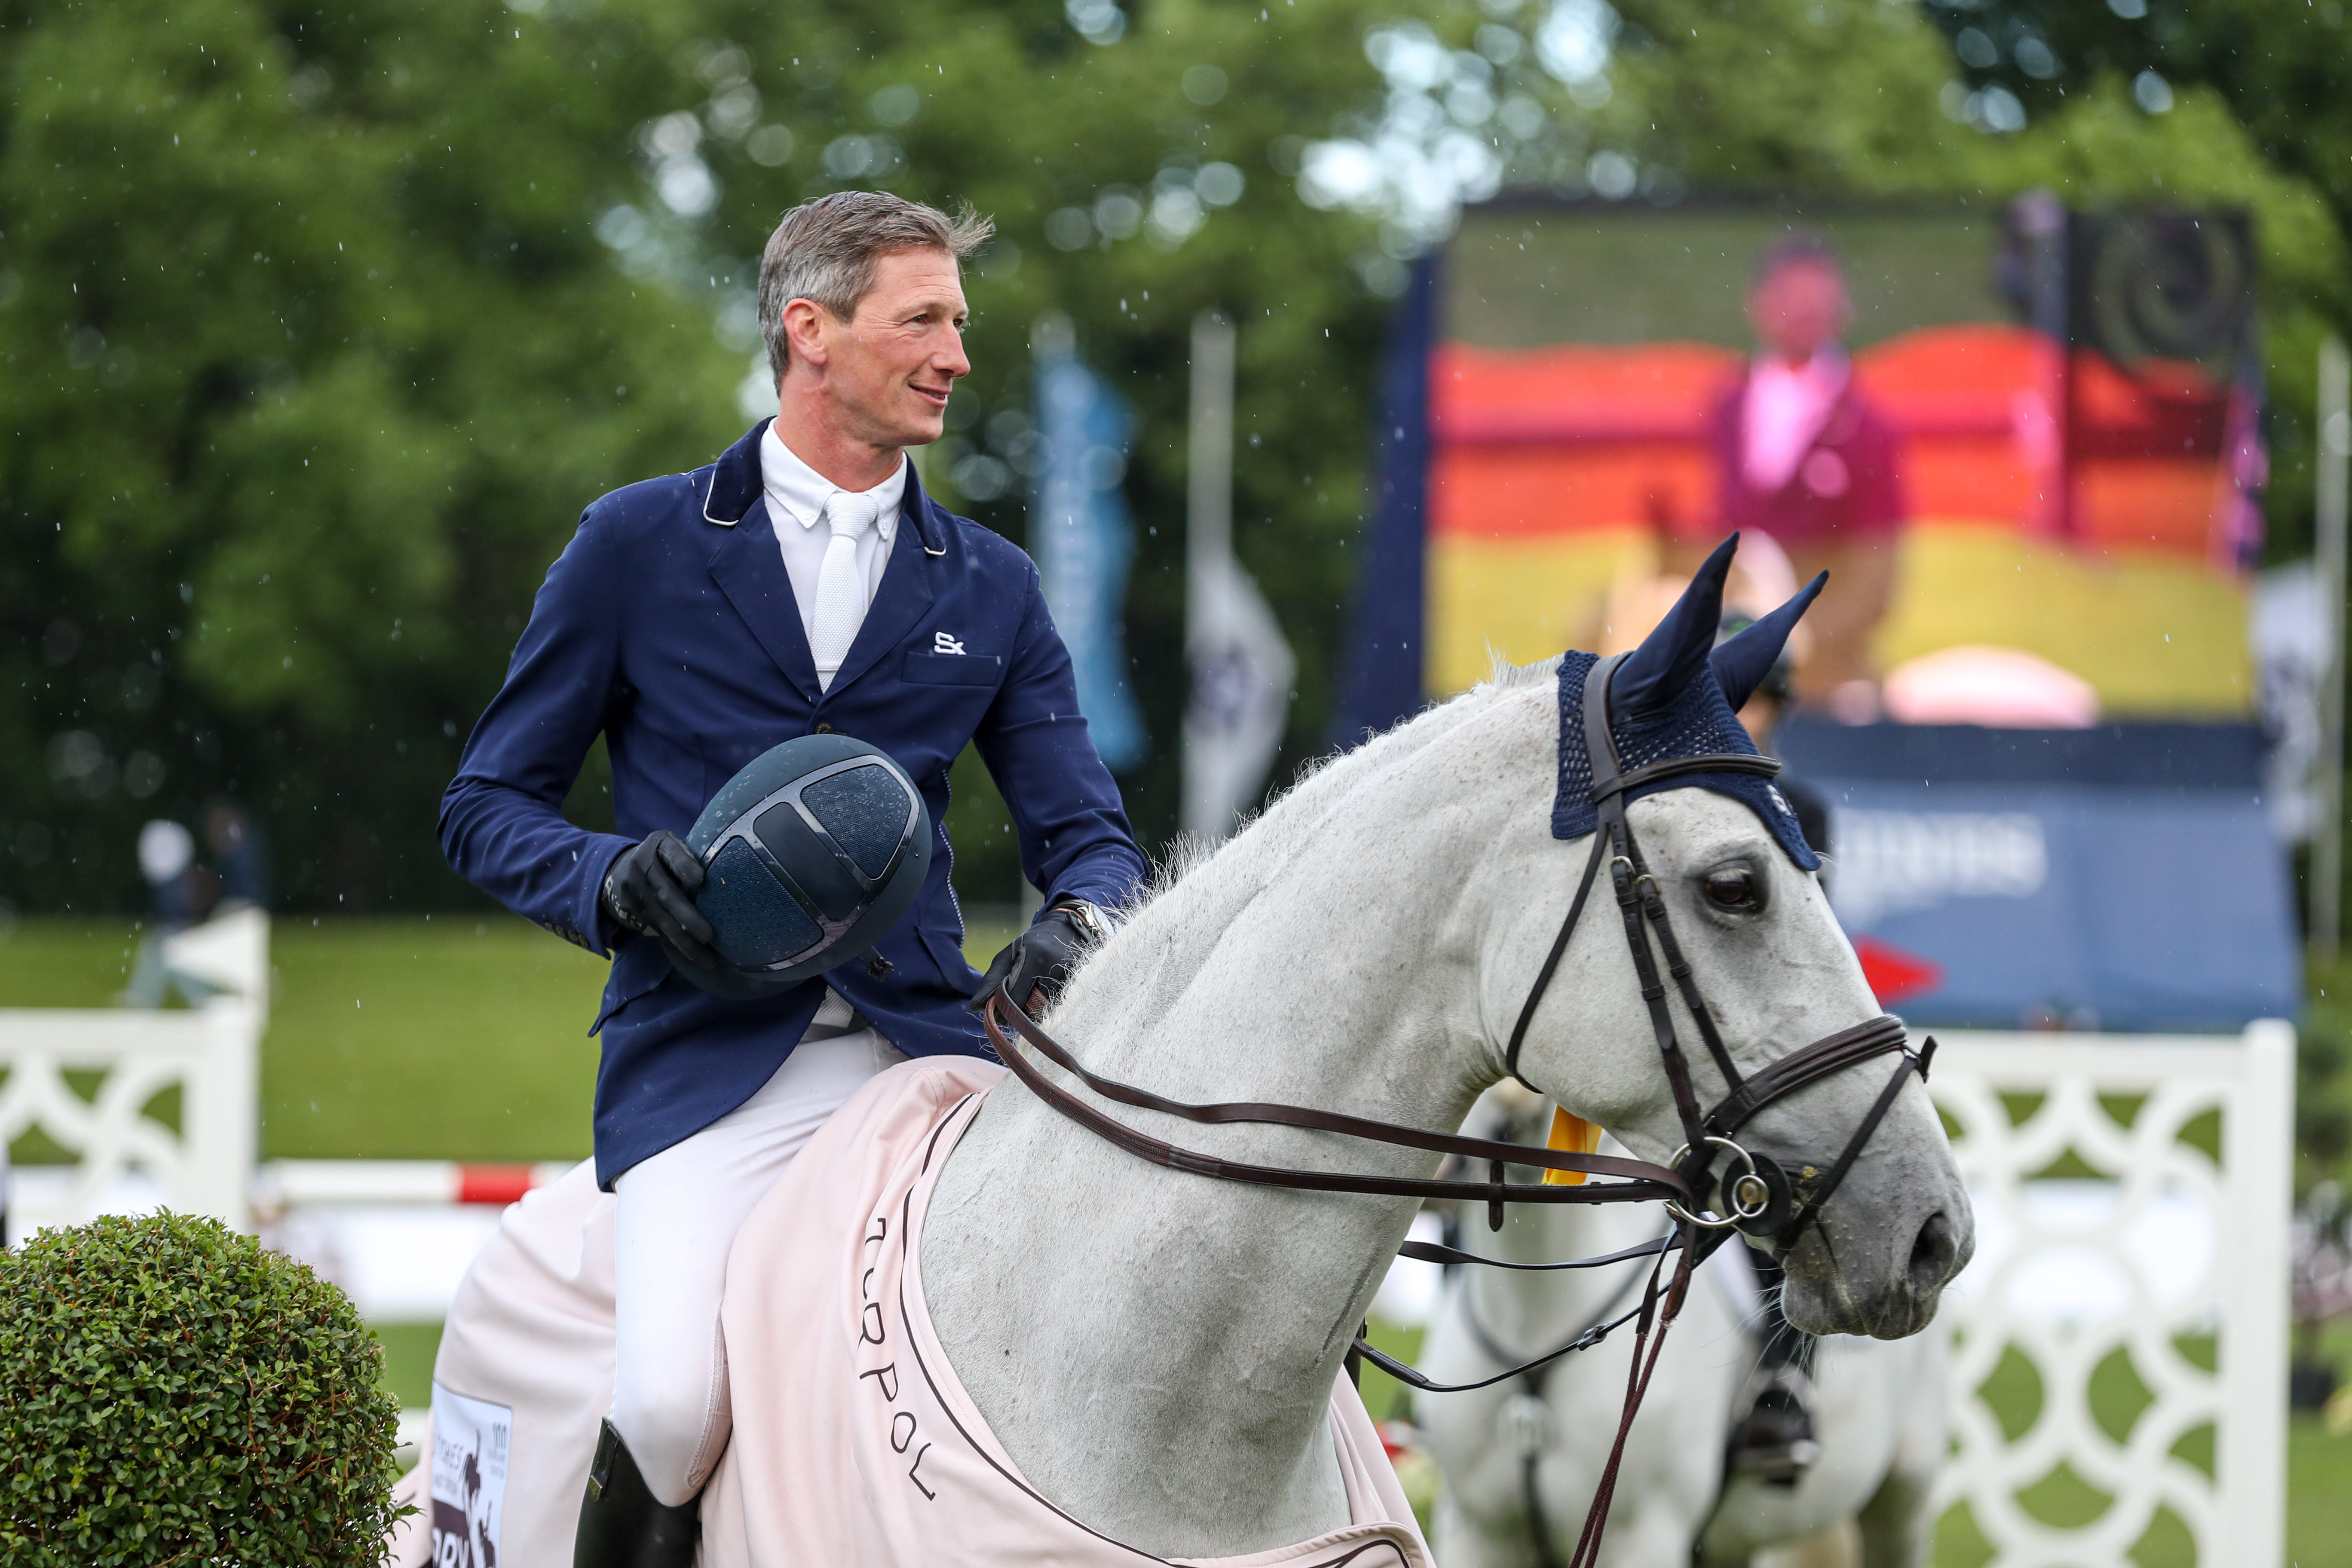 Daniel Deusser victorious in GCL New York, Prague Lions take the win